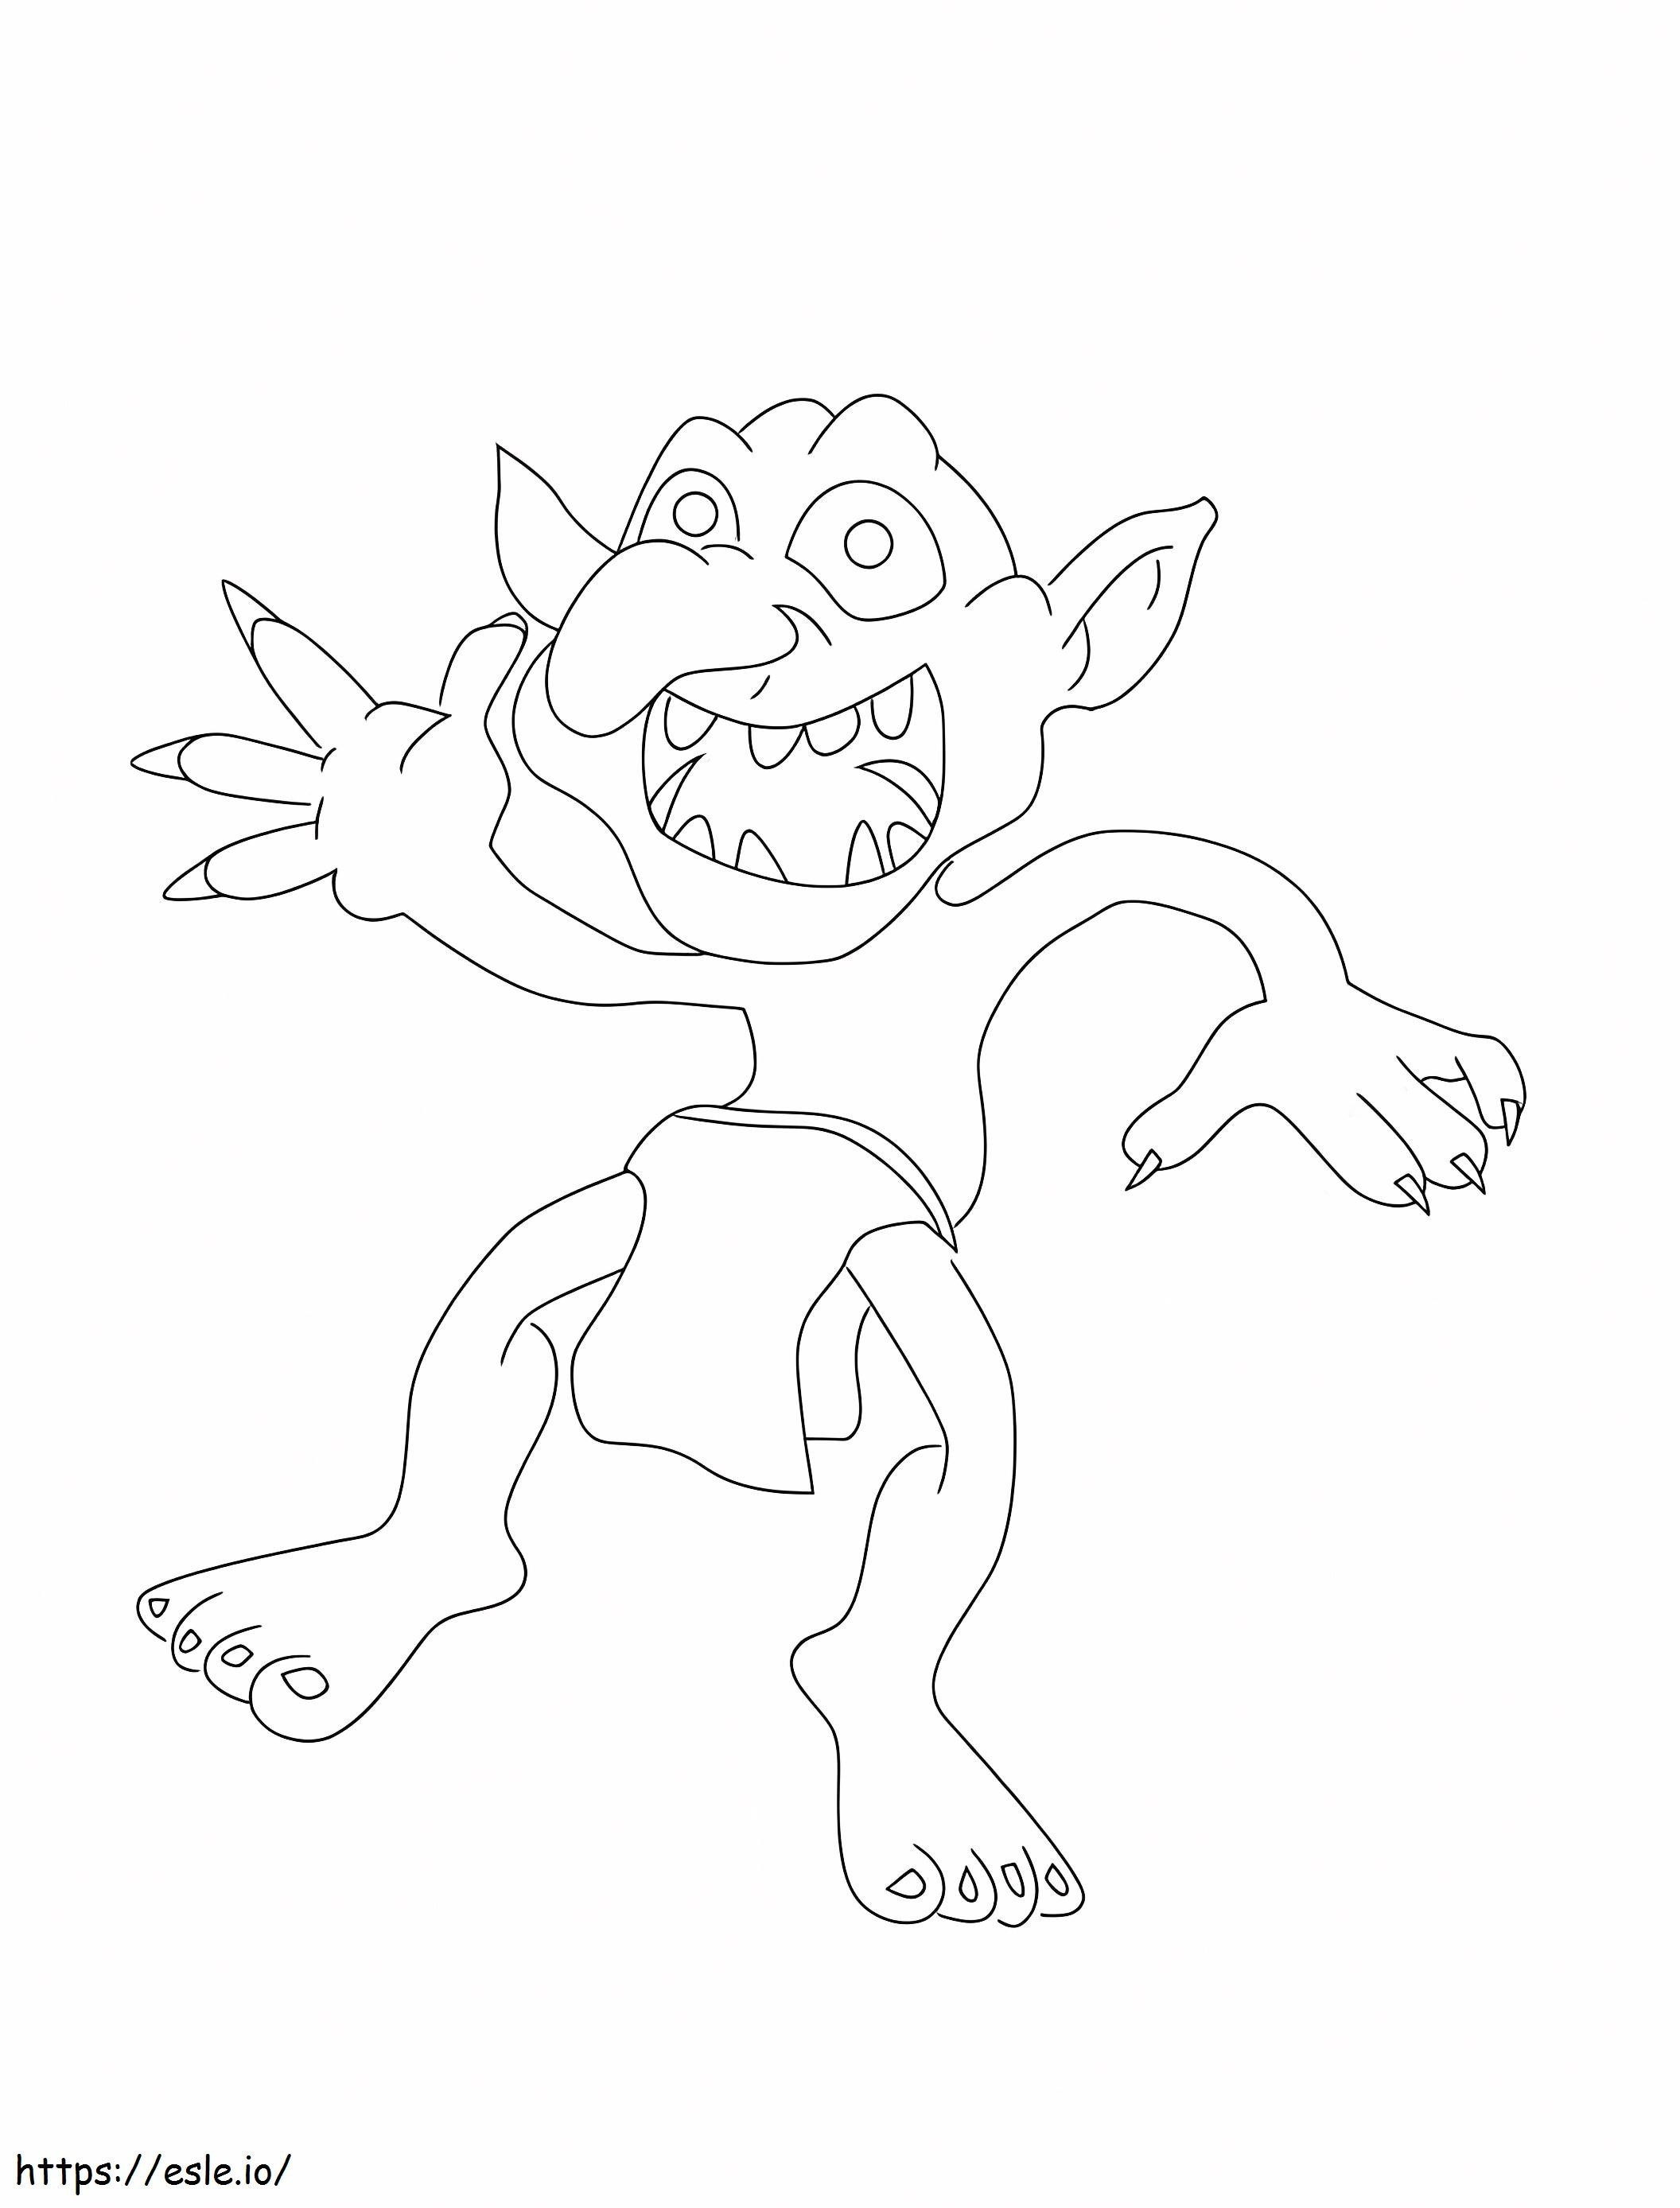 Goblin Sharptooth coloring page